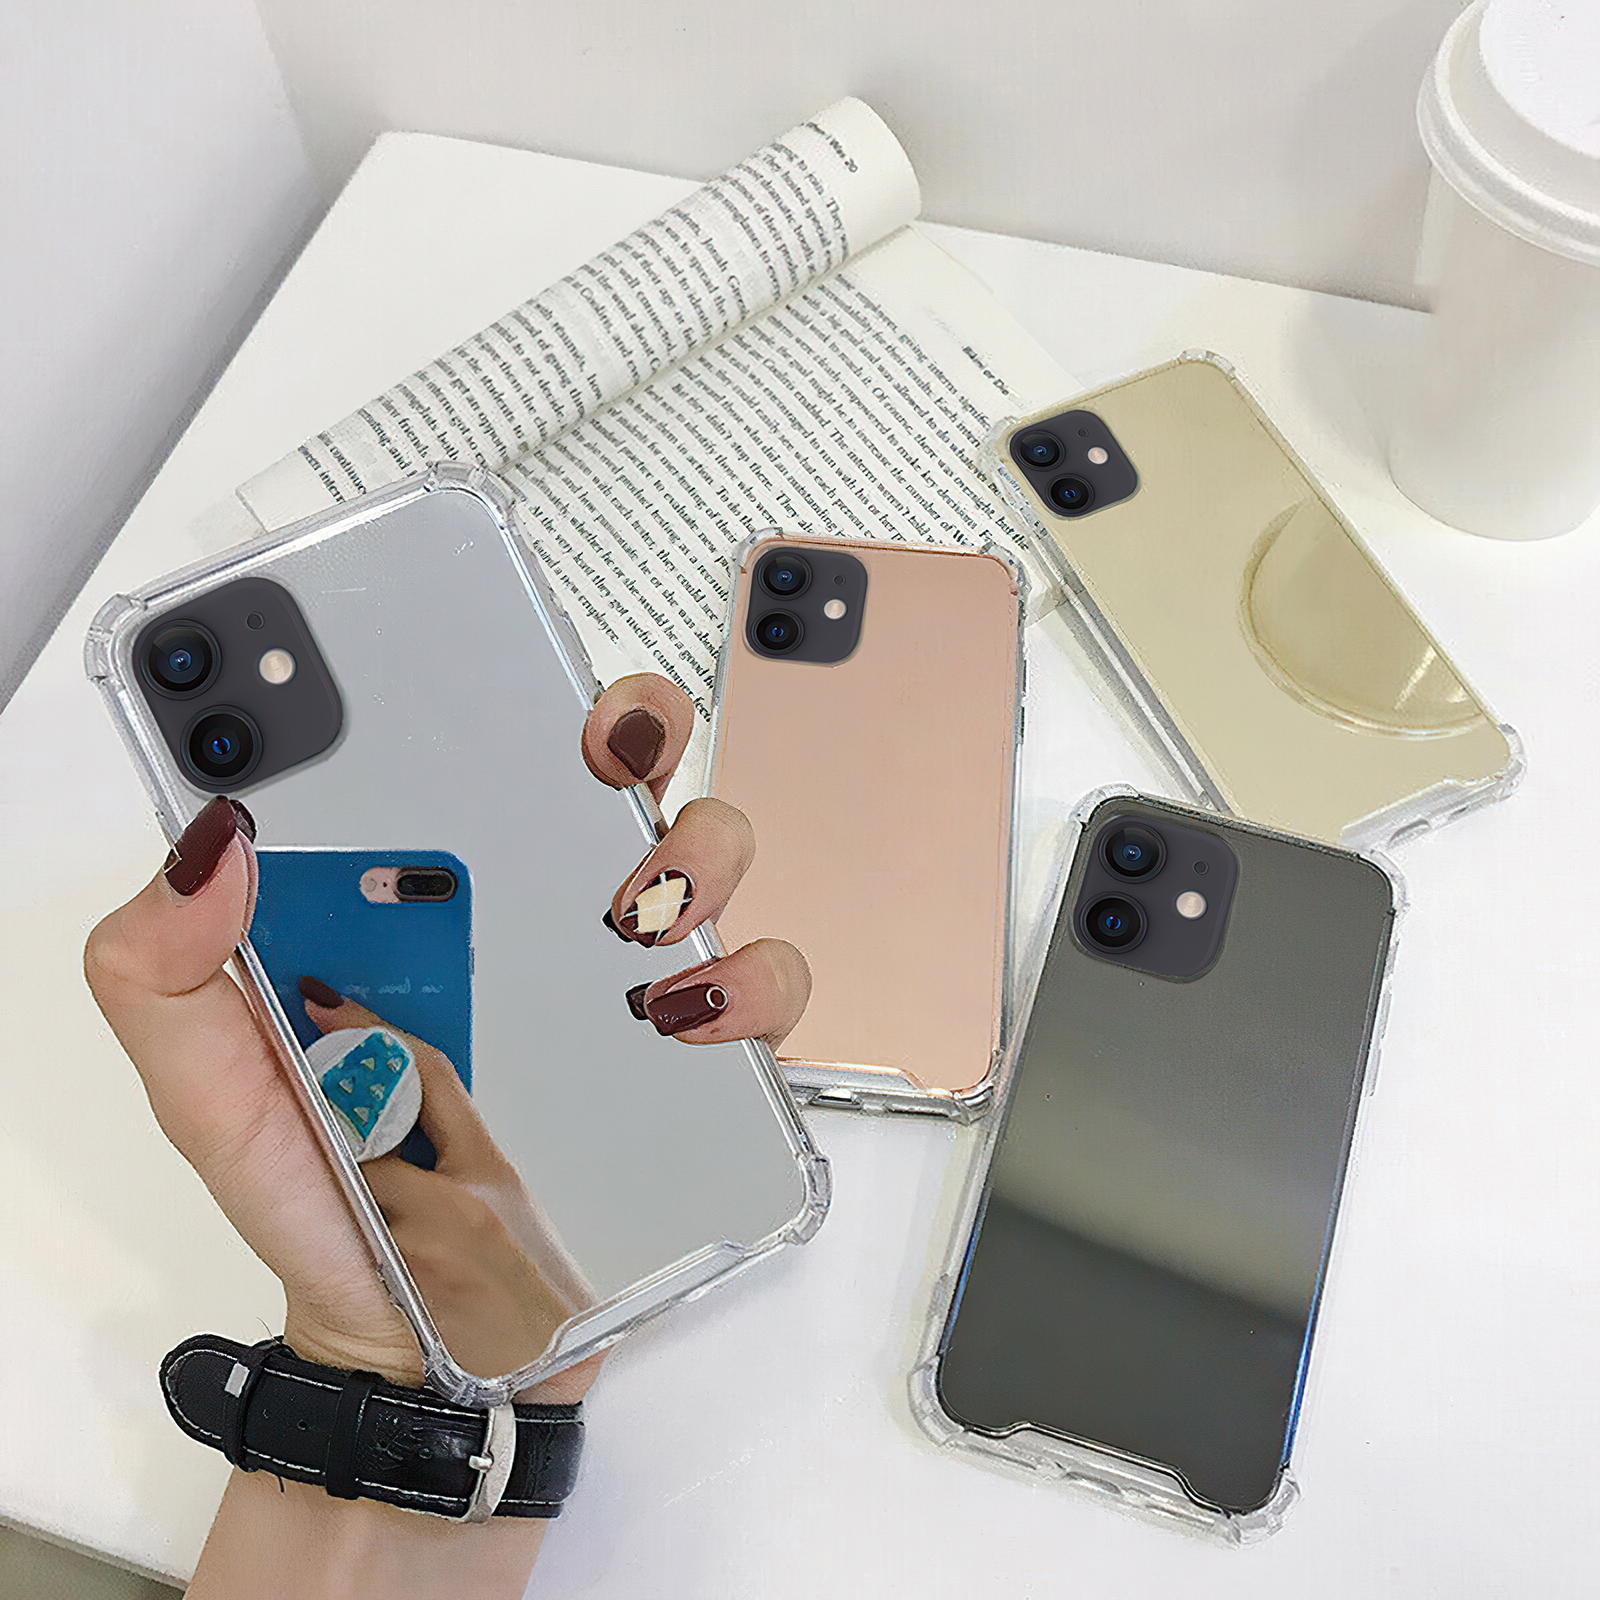 iPhone 11 - Mirror Case Protection